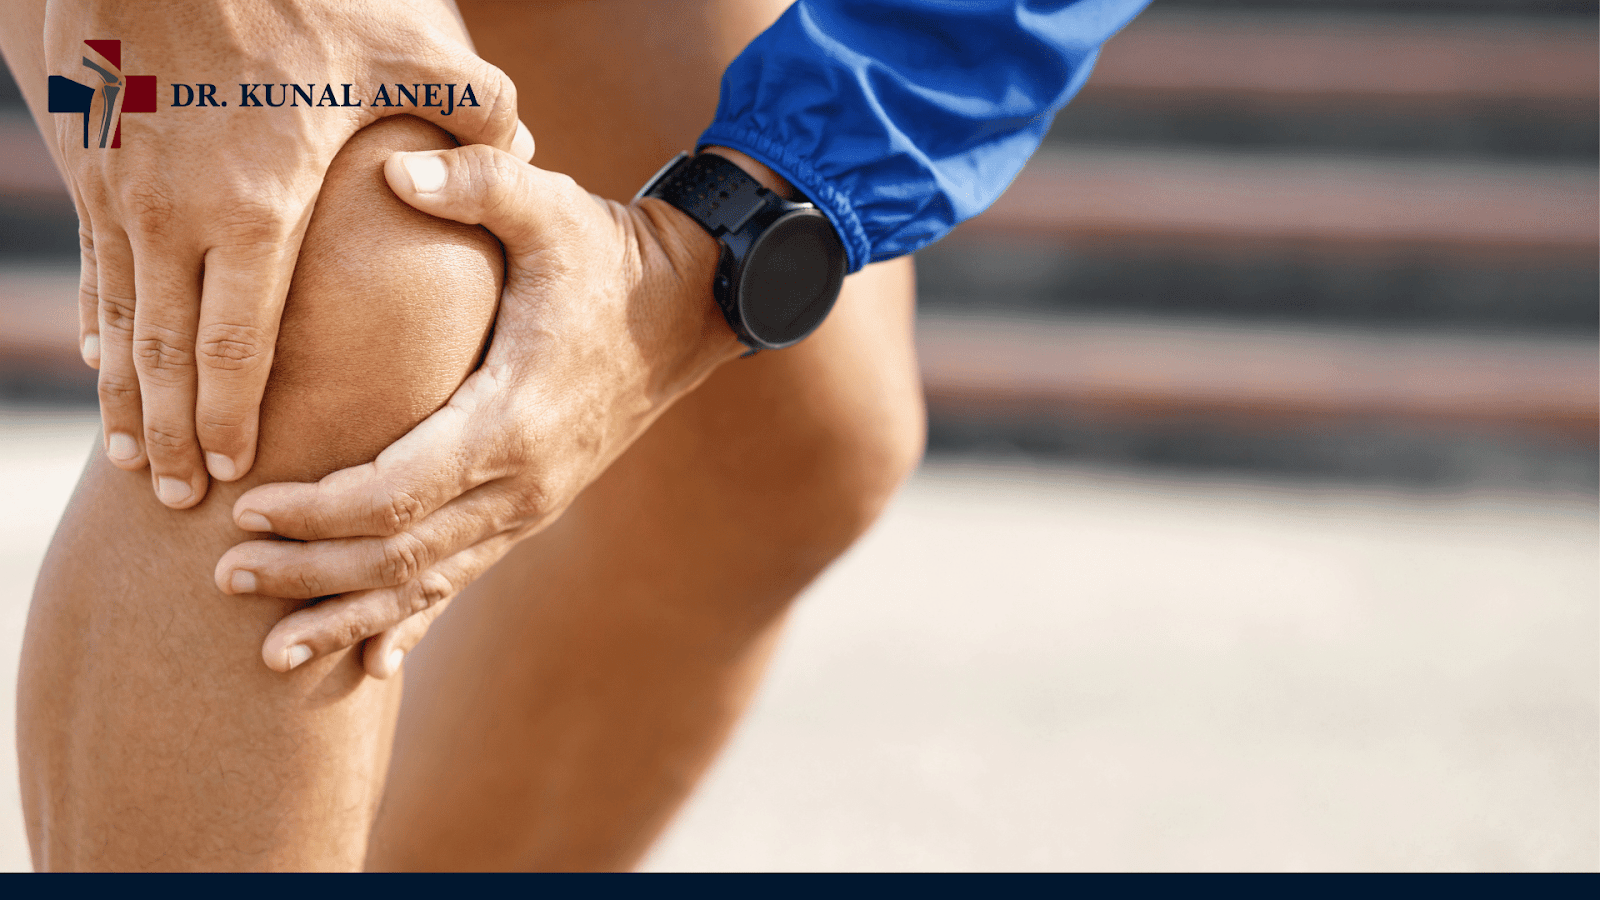 Total Knee Replacement | Risks and Benefits